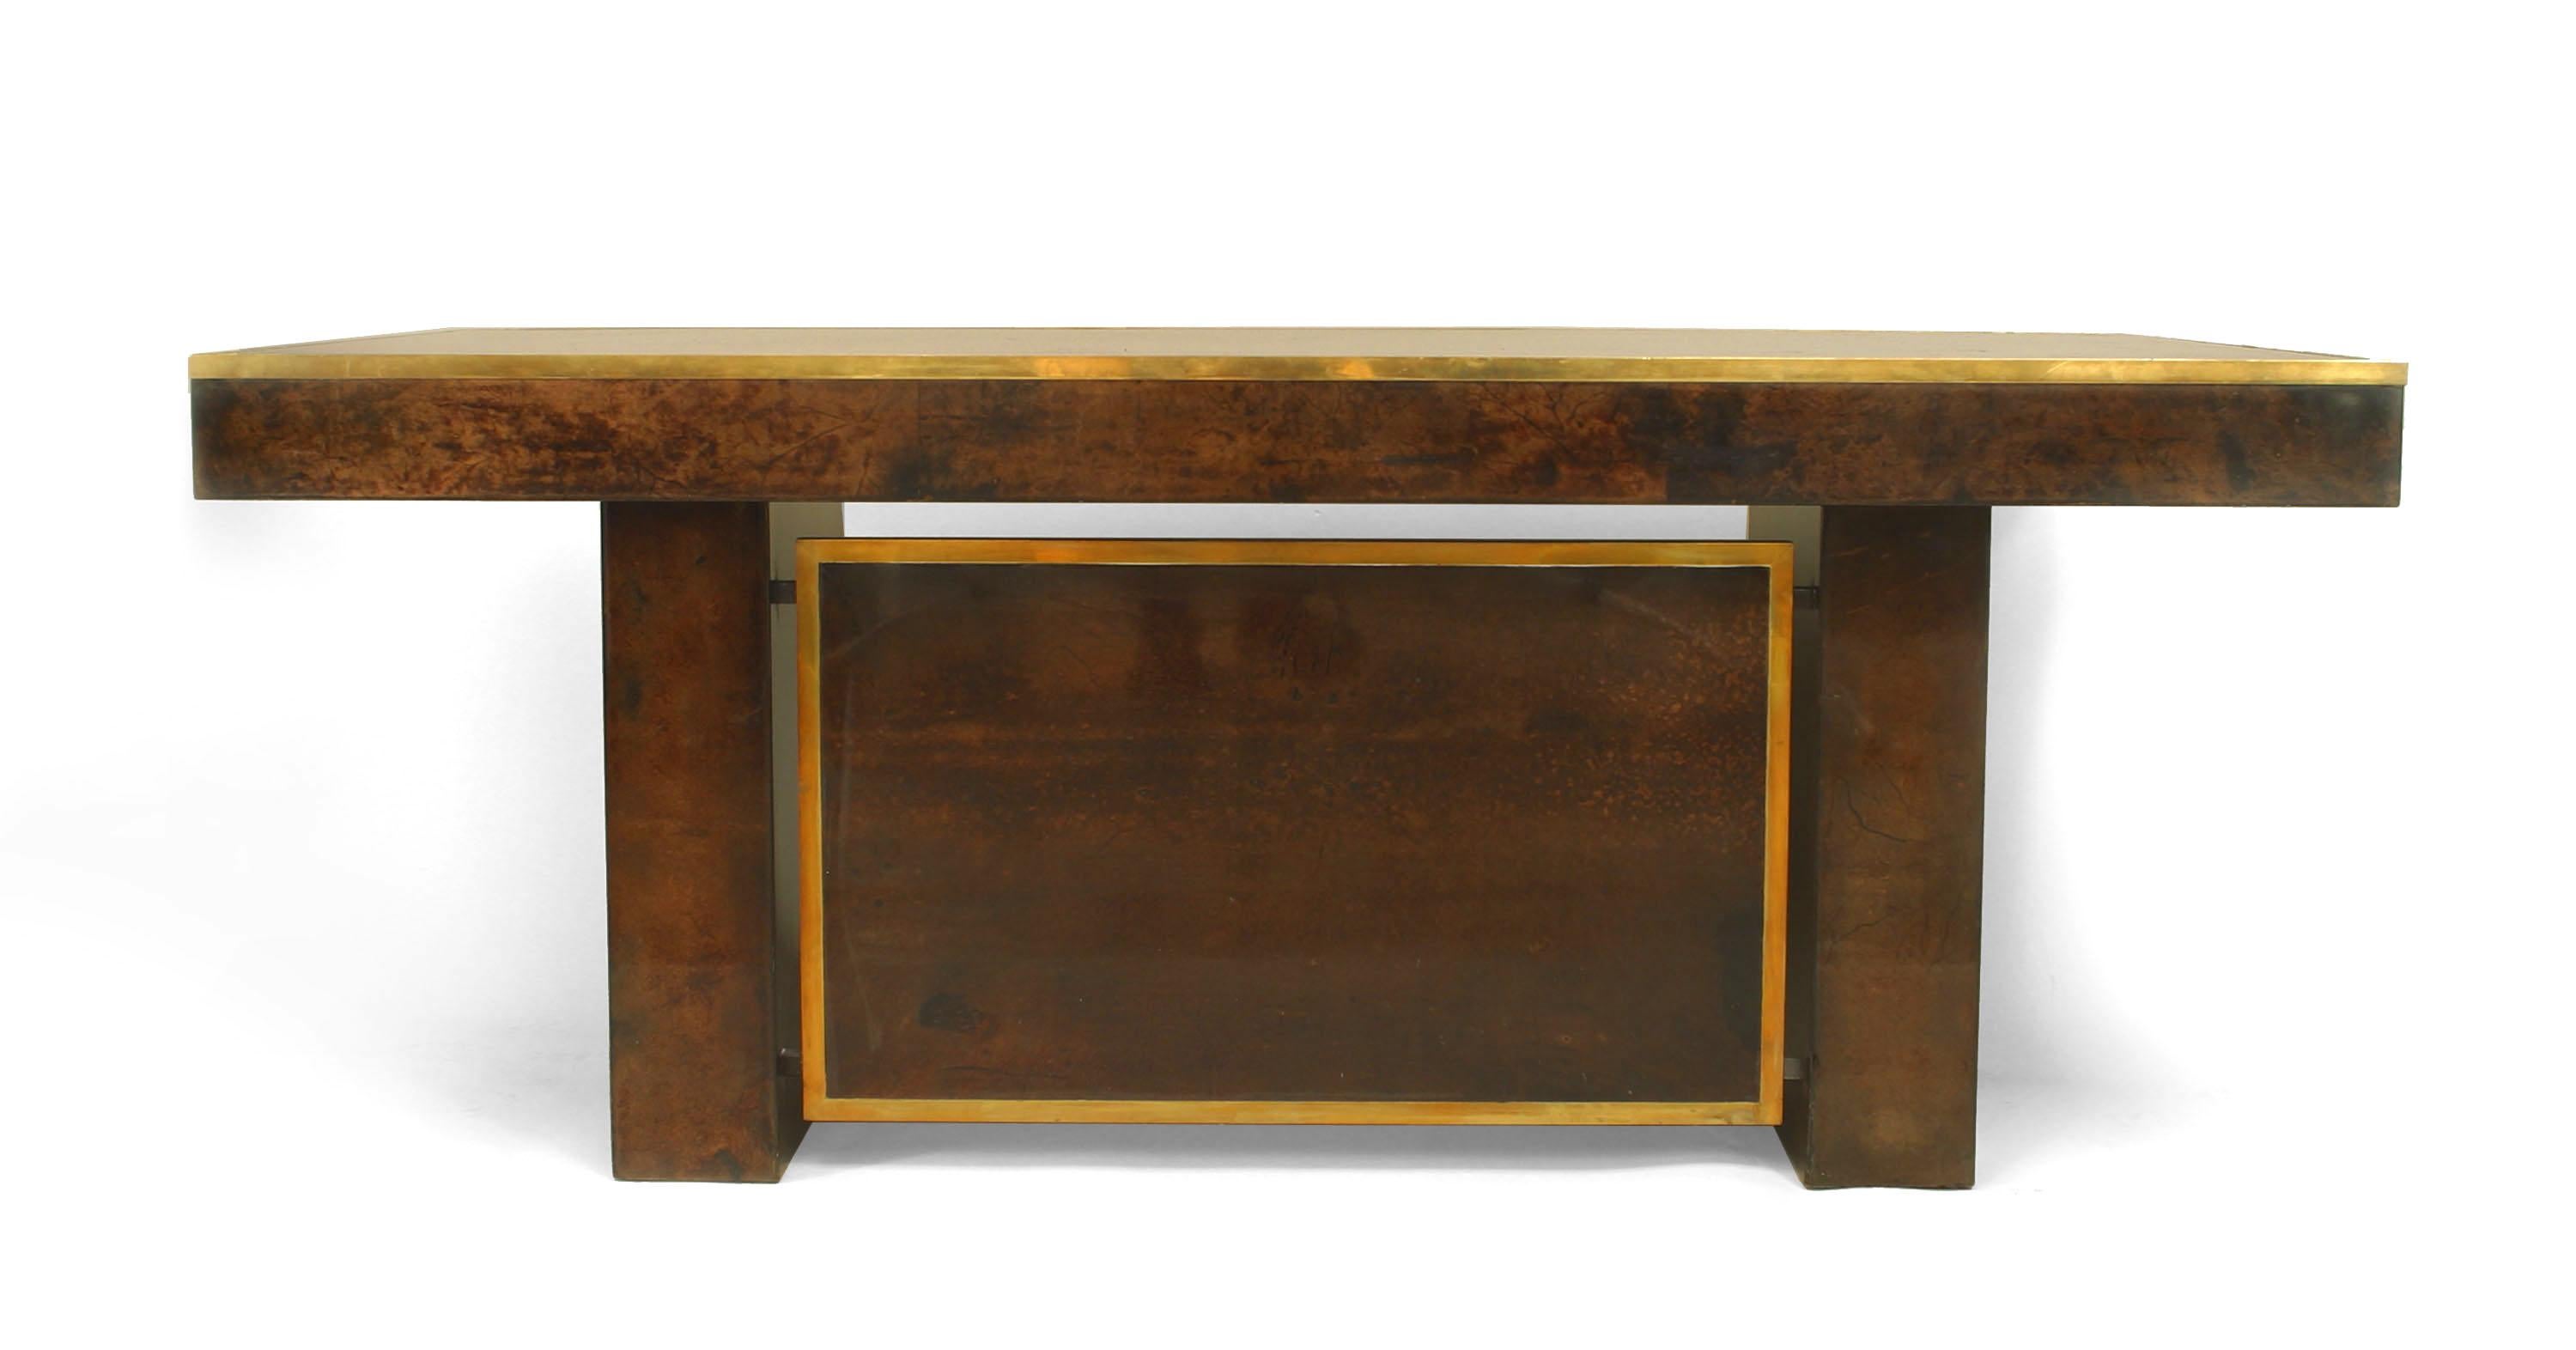 Italian 1940/1950s brown parchment veneer desk with brass trimmed edge and 4 drawers supported on 2 rectangular pedestals with a vanity panel. (ALDO TURA)
